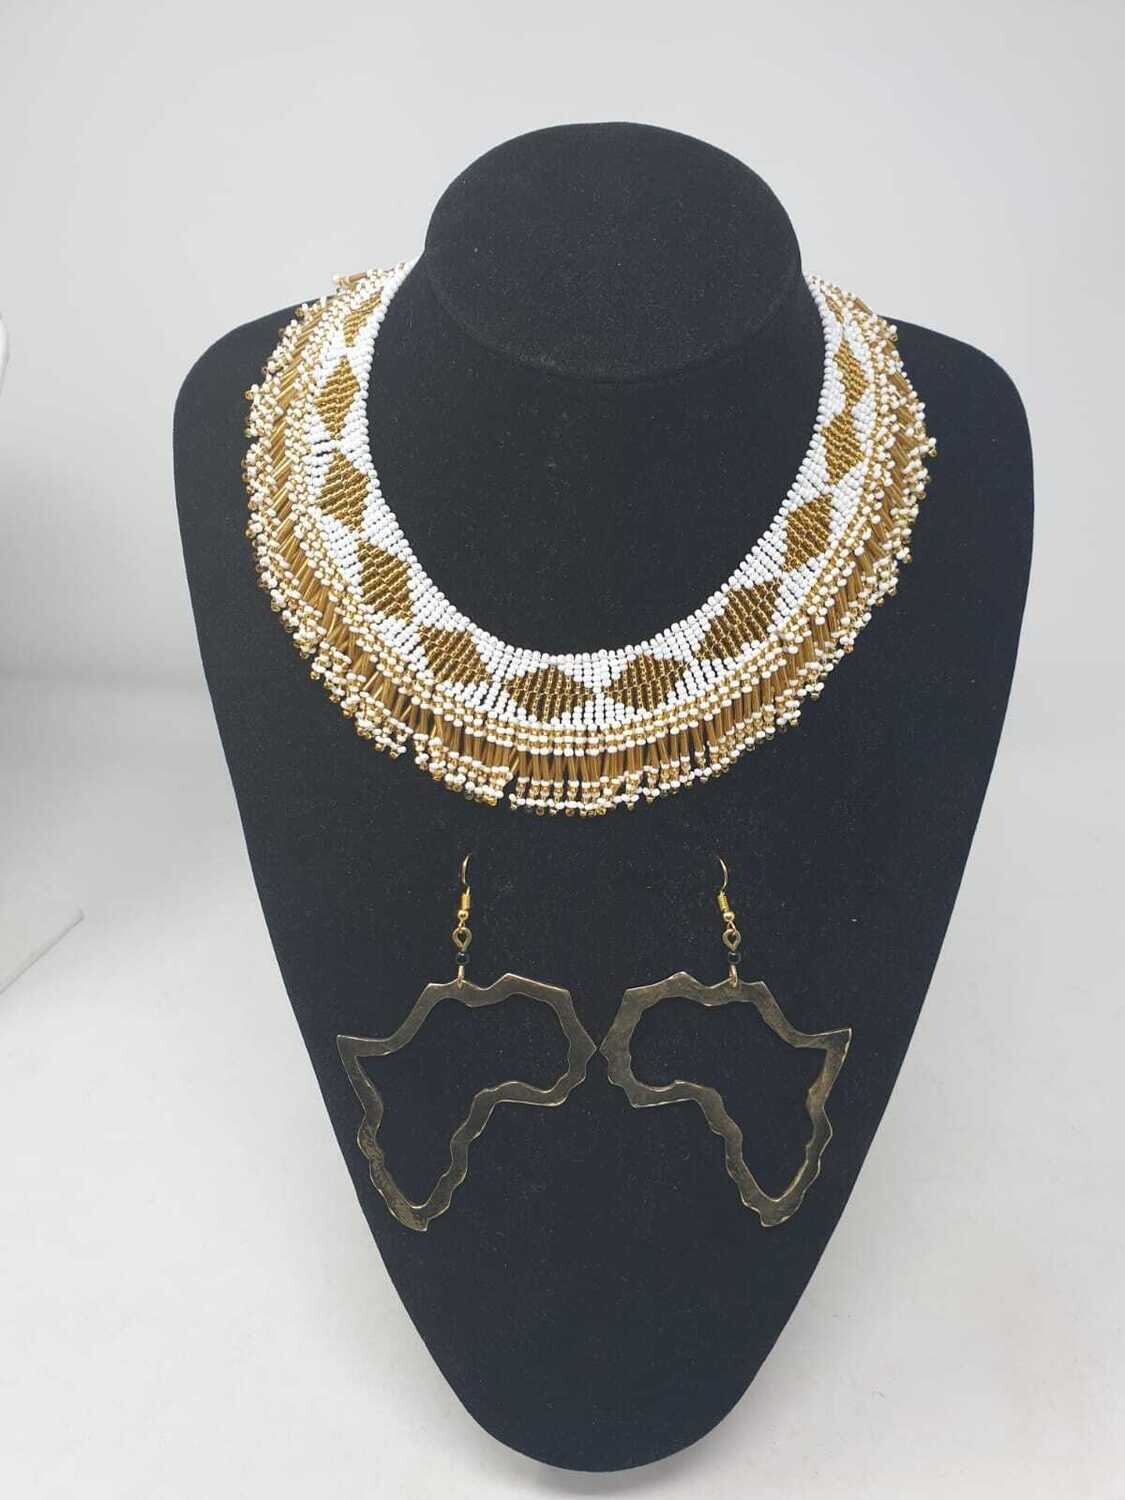 Handbeaded Necklace with Matching Earrings - Gold and White